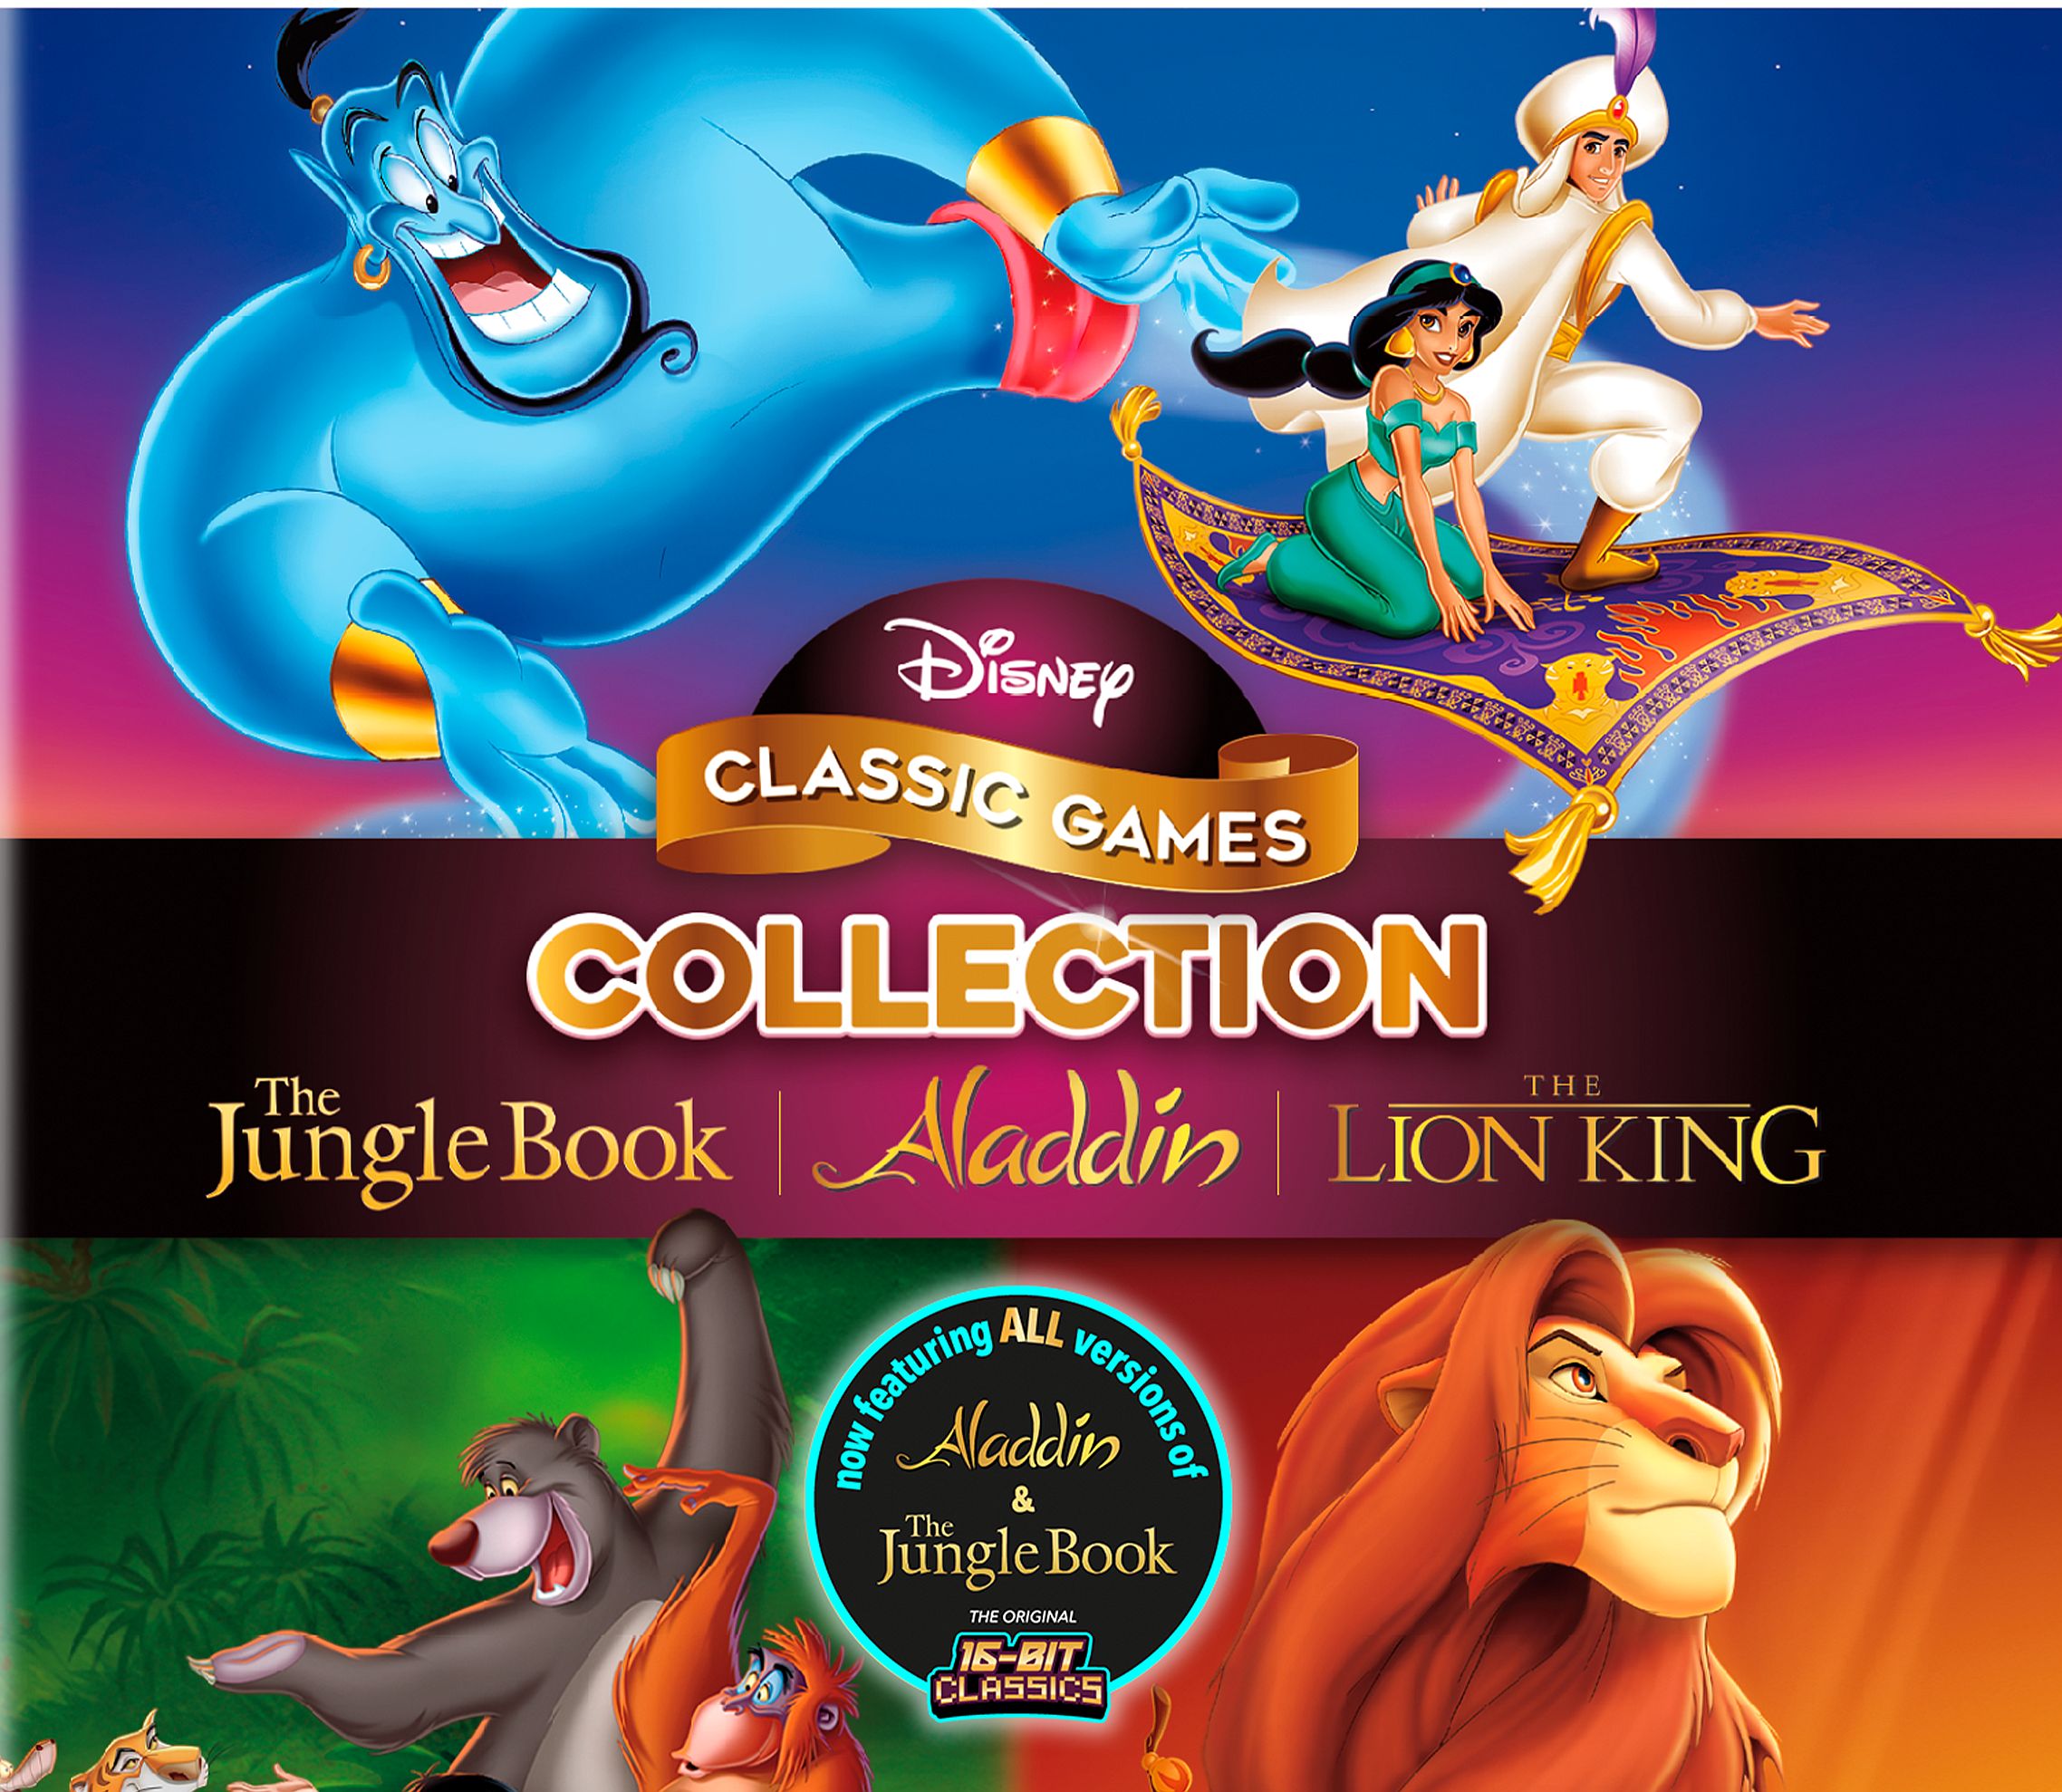 Disney Classic Games Collection coming current-gen | VG247